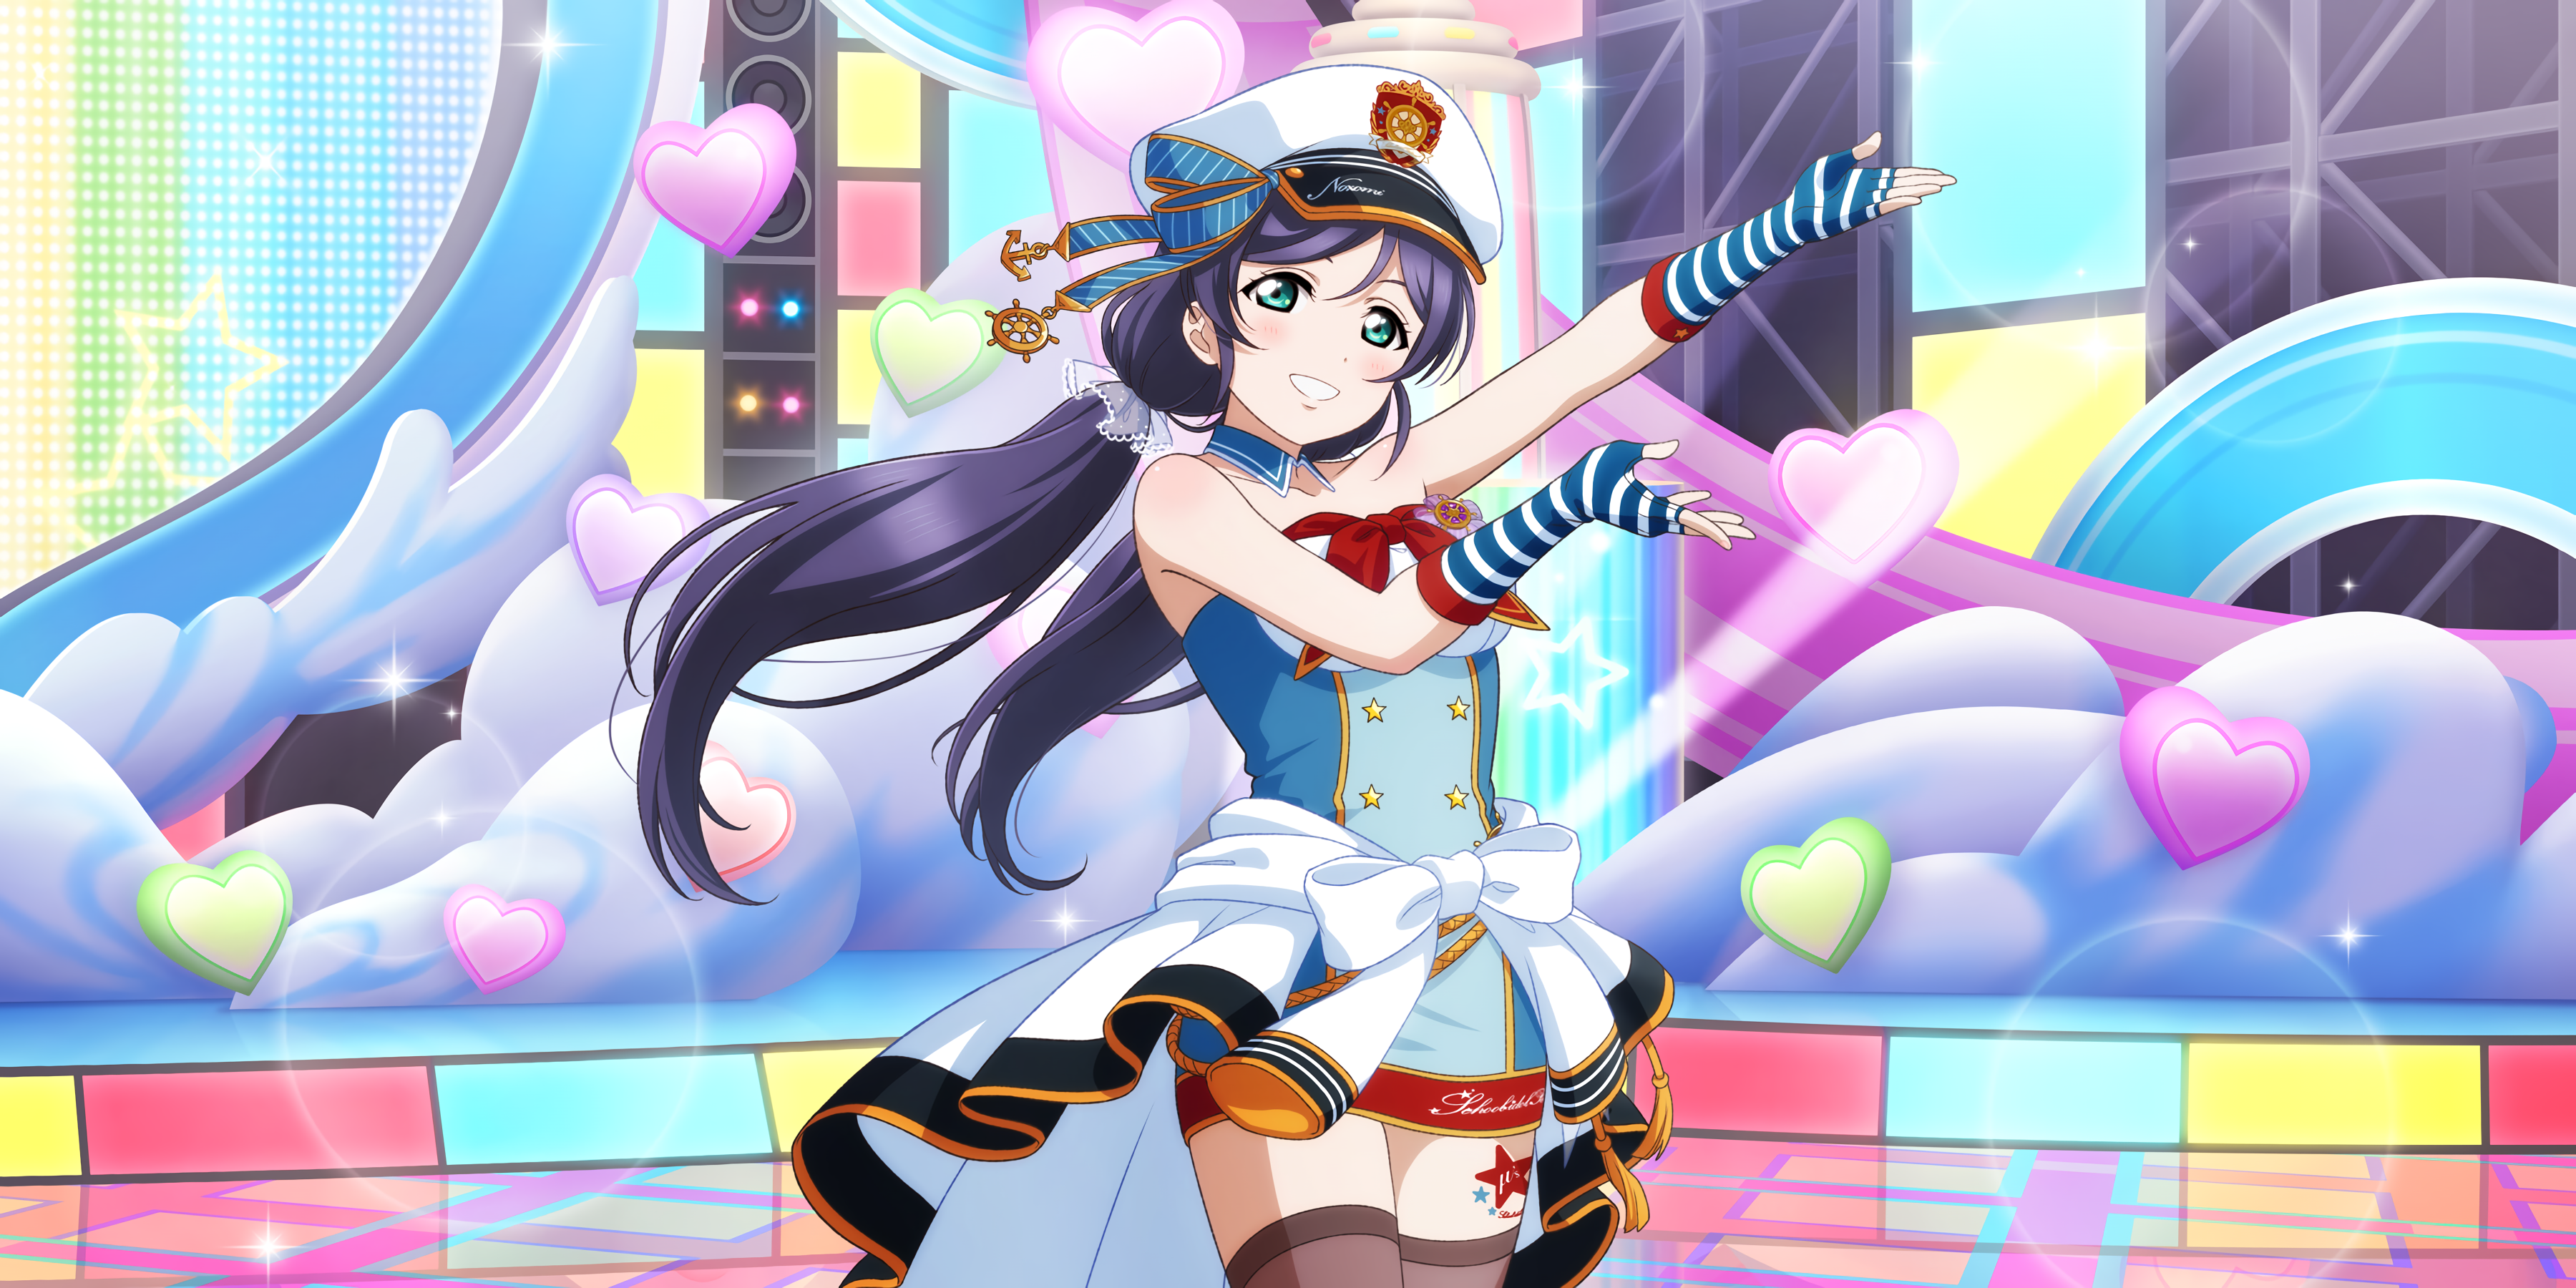 Toujou Nozomi Love Live Anime Anime Girls Stages Stage Light Gloves Hat Twintails Heart Design Stars 3600x1800